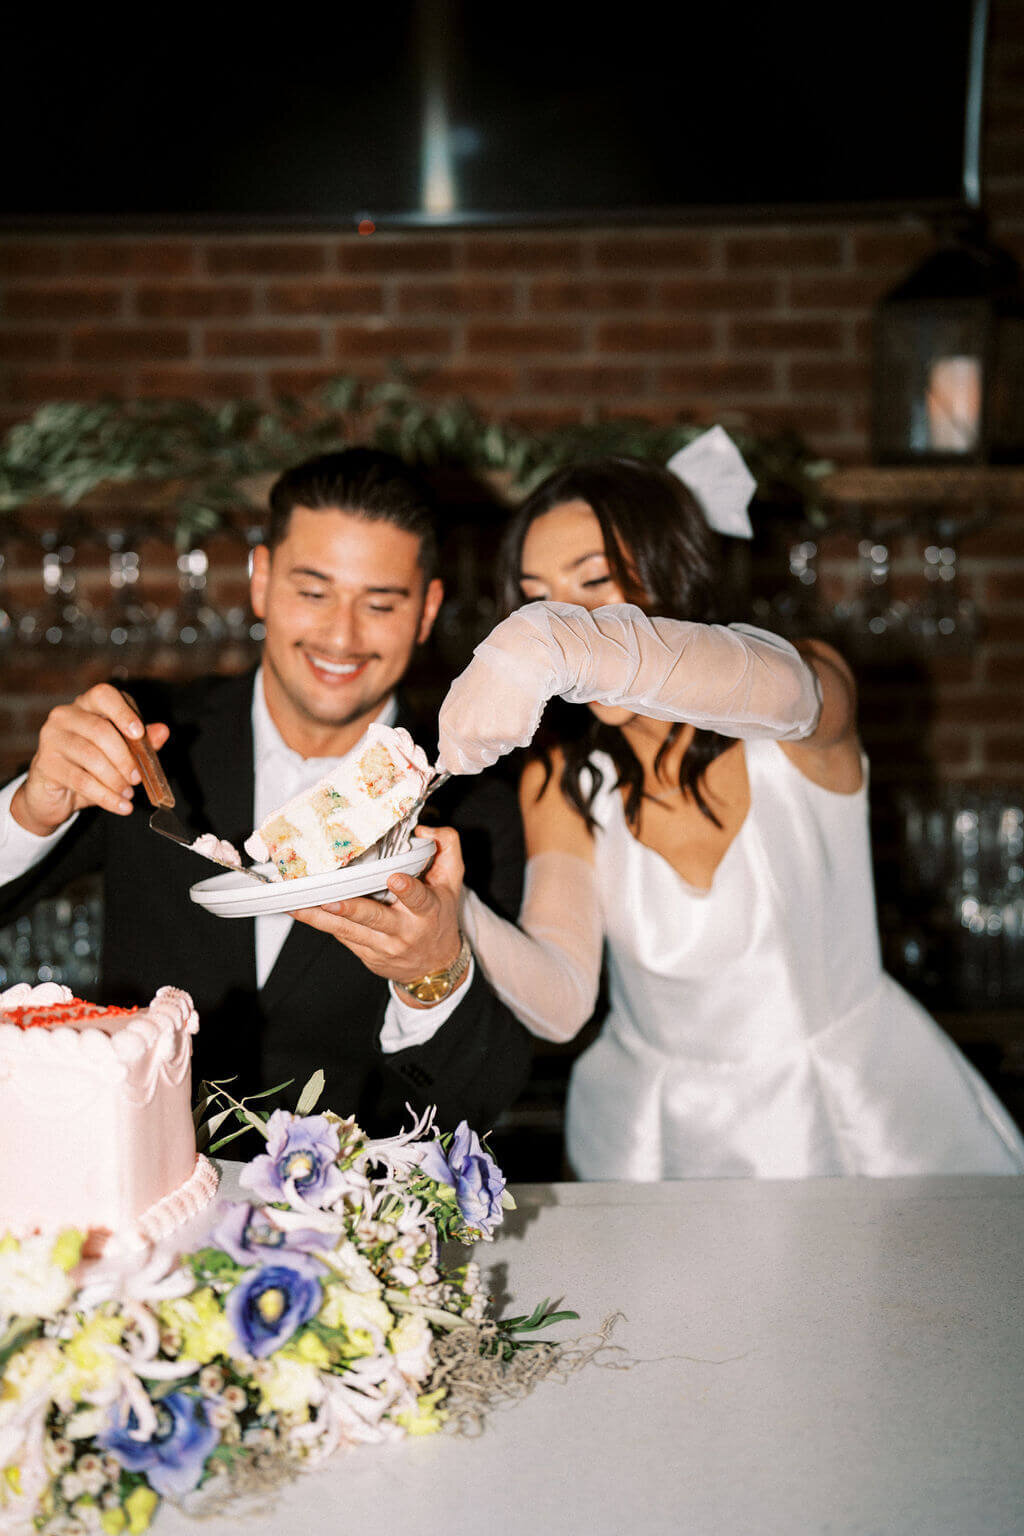 Couple eating their wedding cake at their elopement